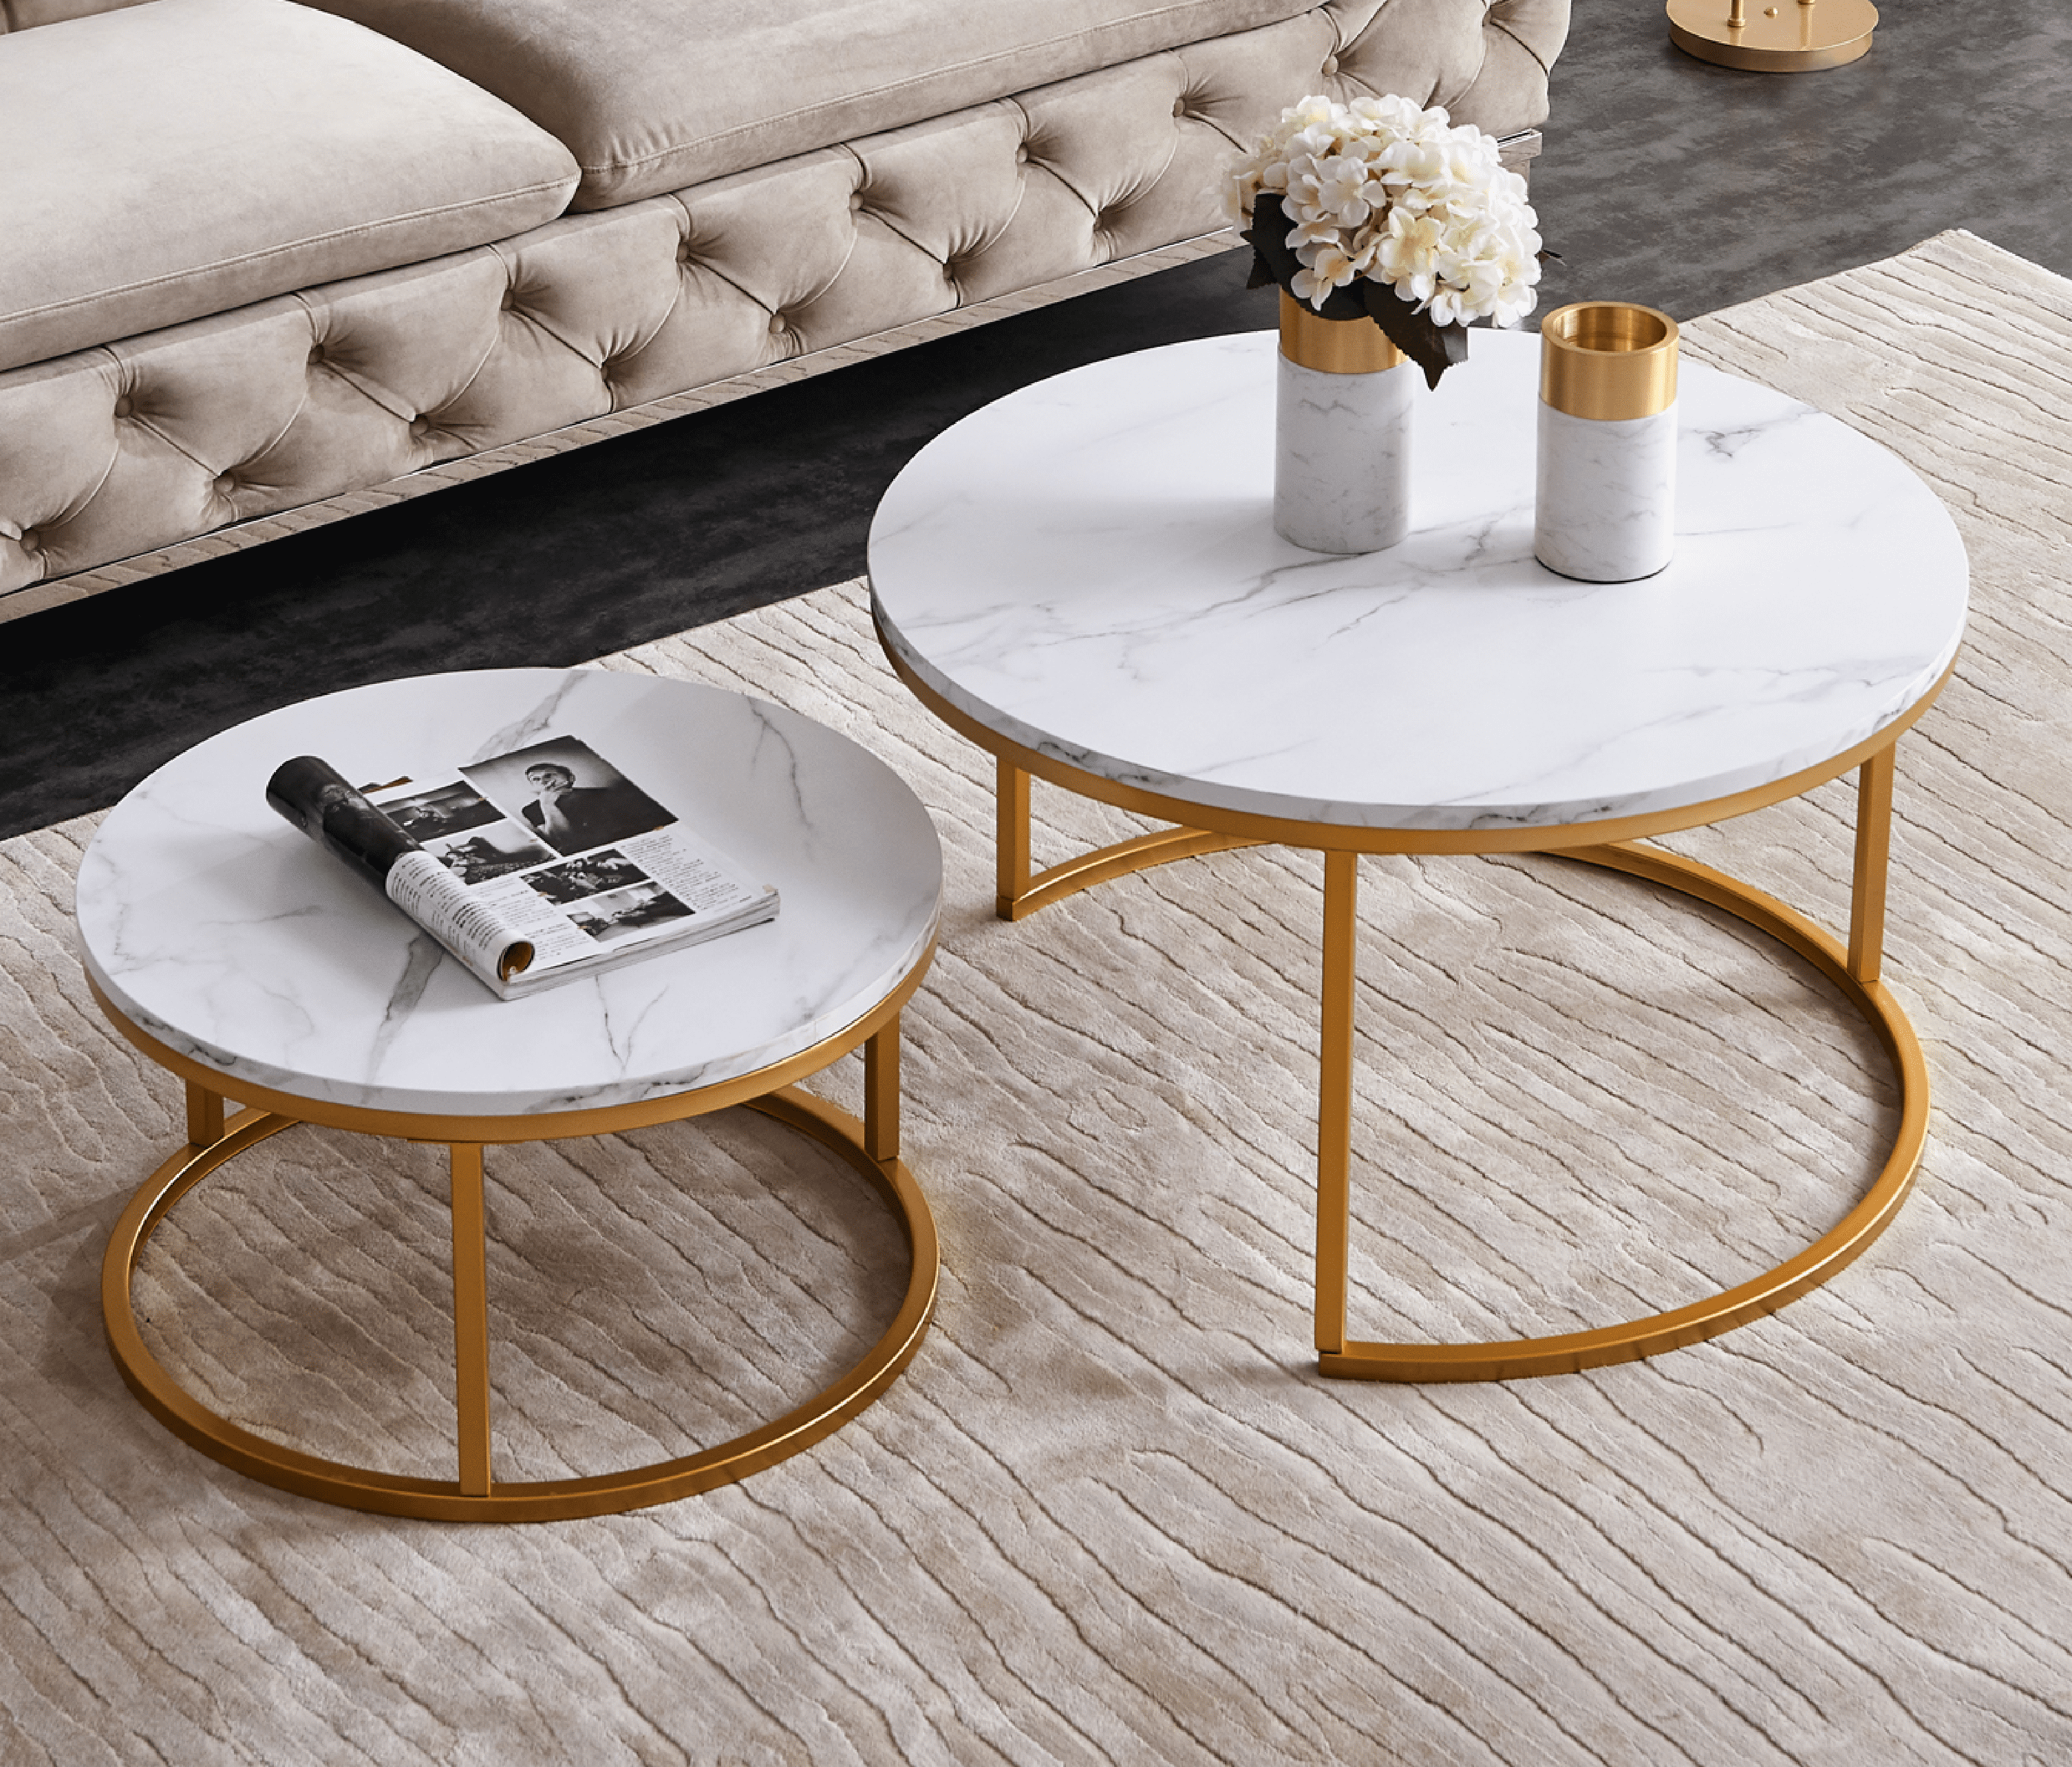 Top-32” Modern Nesting Coffee Table Simple Modern Living Room -2 Round ...